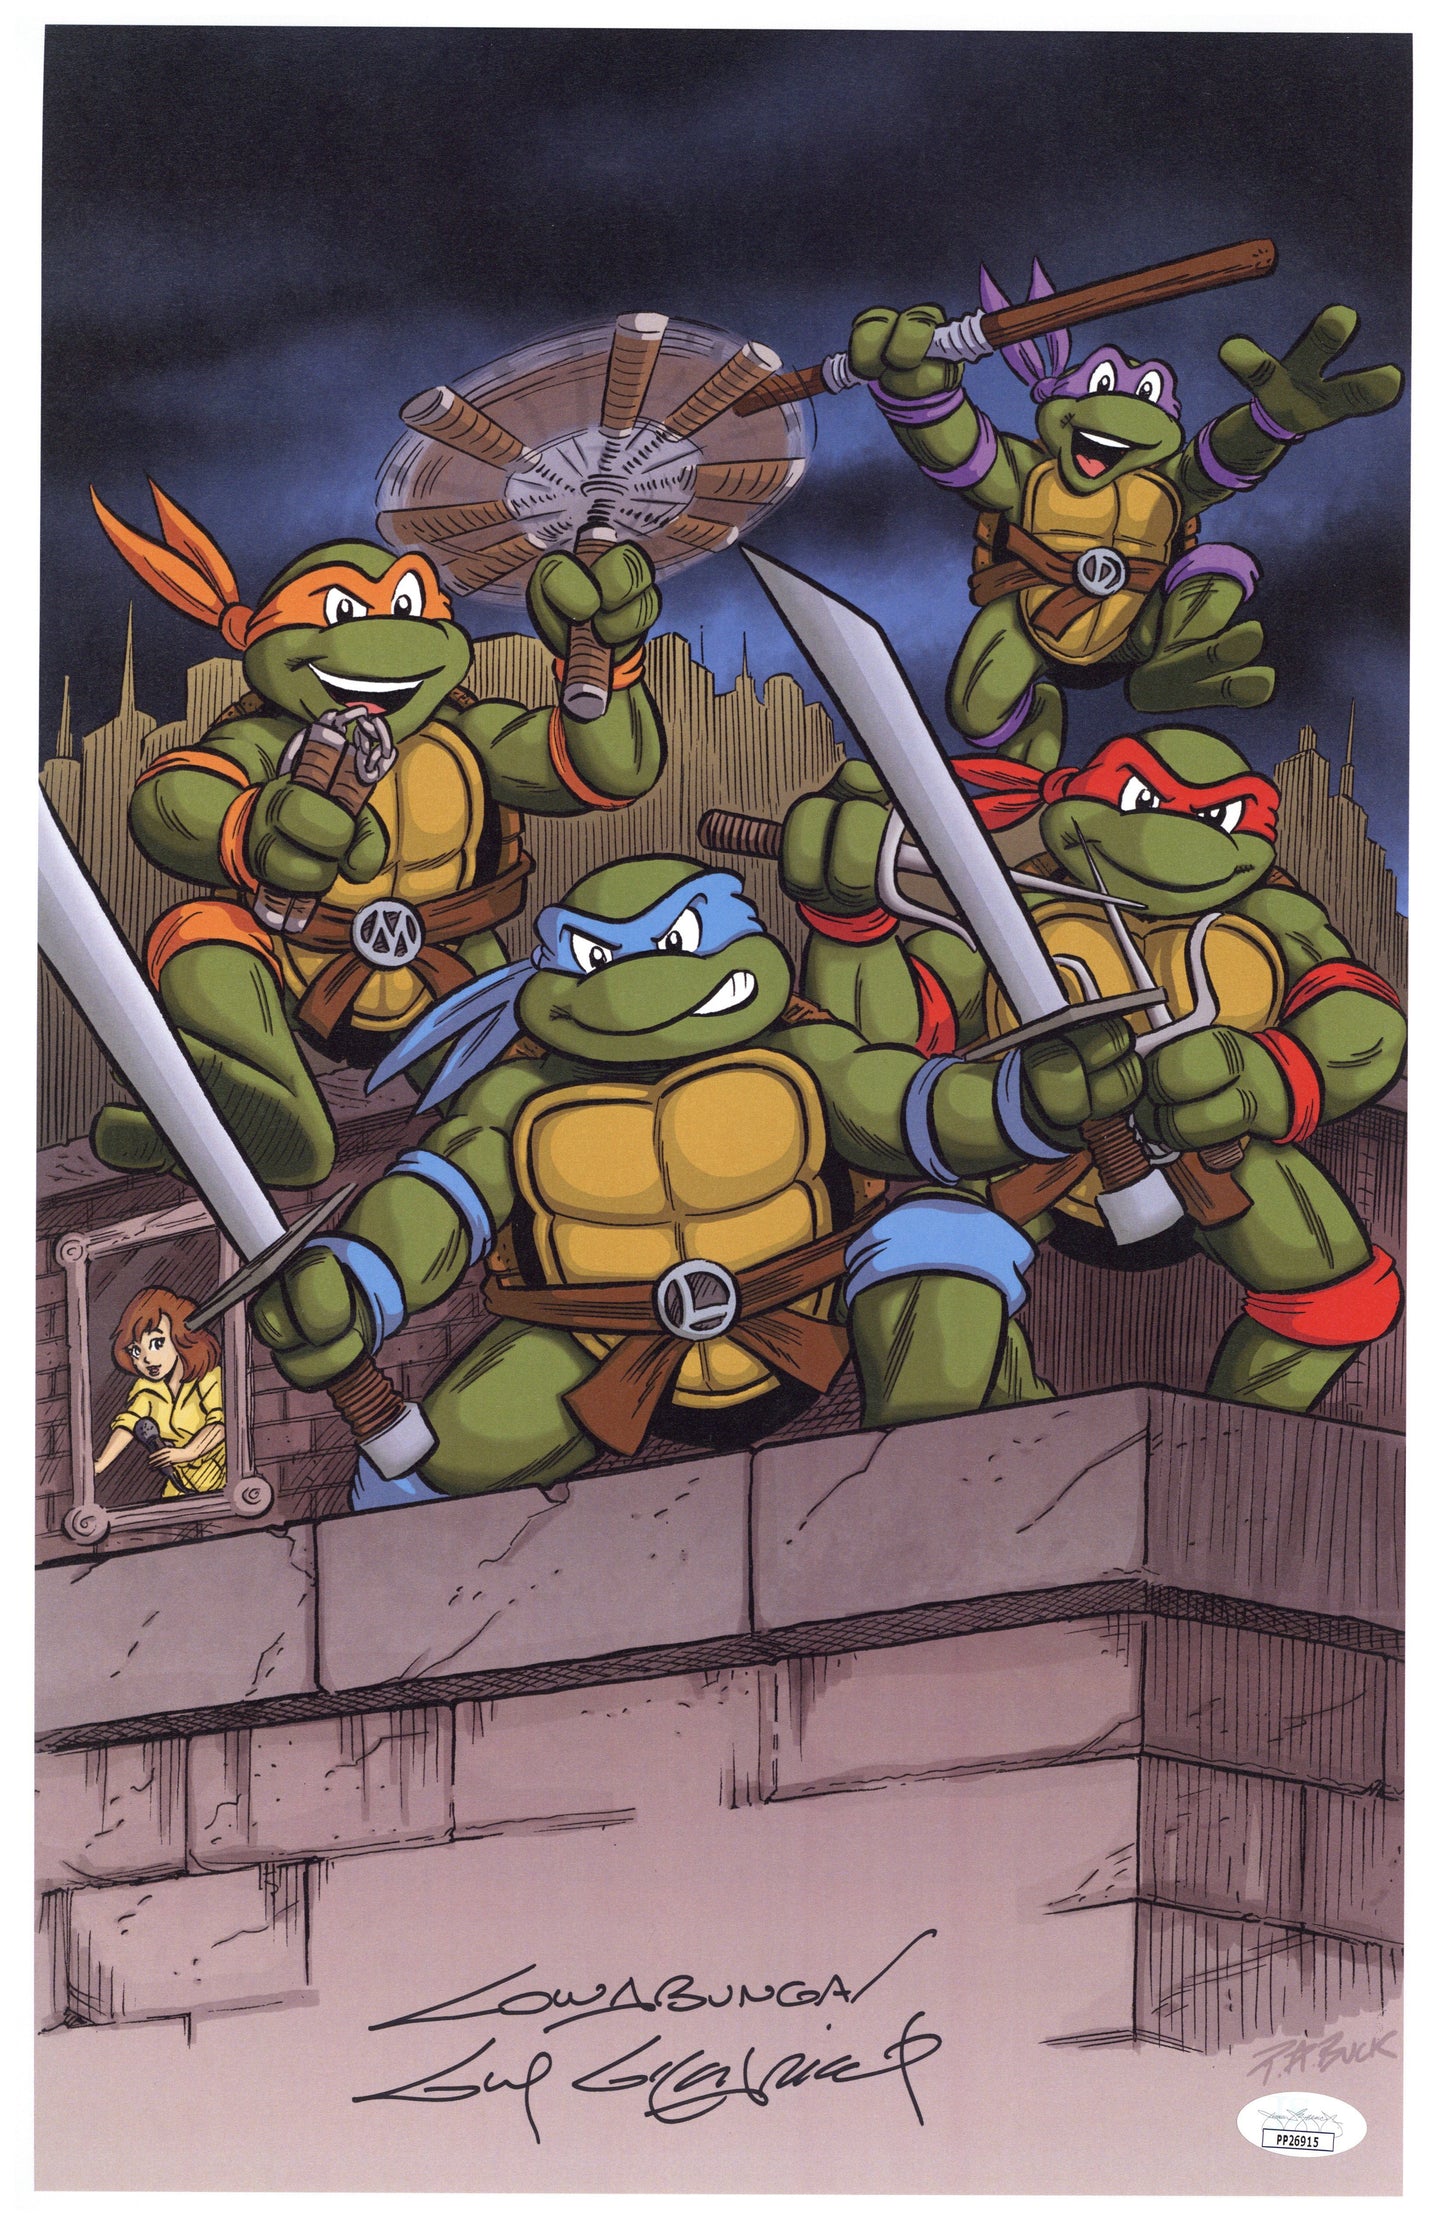 Teenage Mutant Ninja Turtles Rooftop 11x17 Art Print - Created by & Signed by Guy Gilchrist - Includes JSA COA